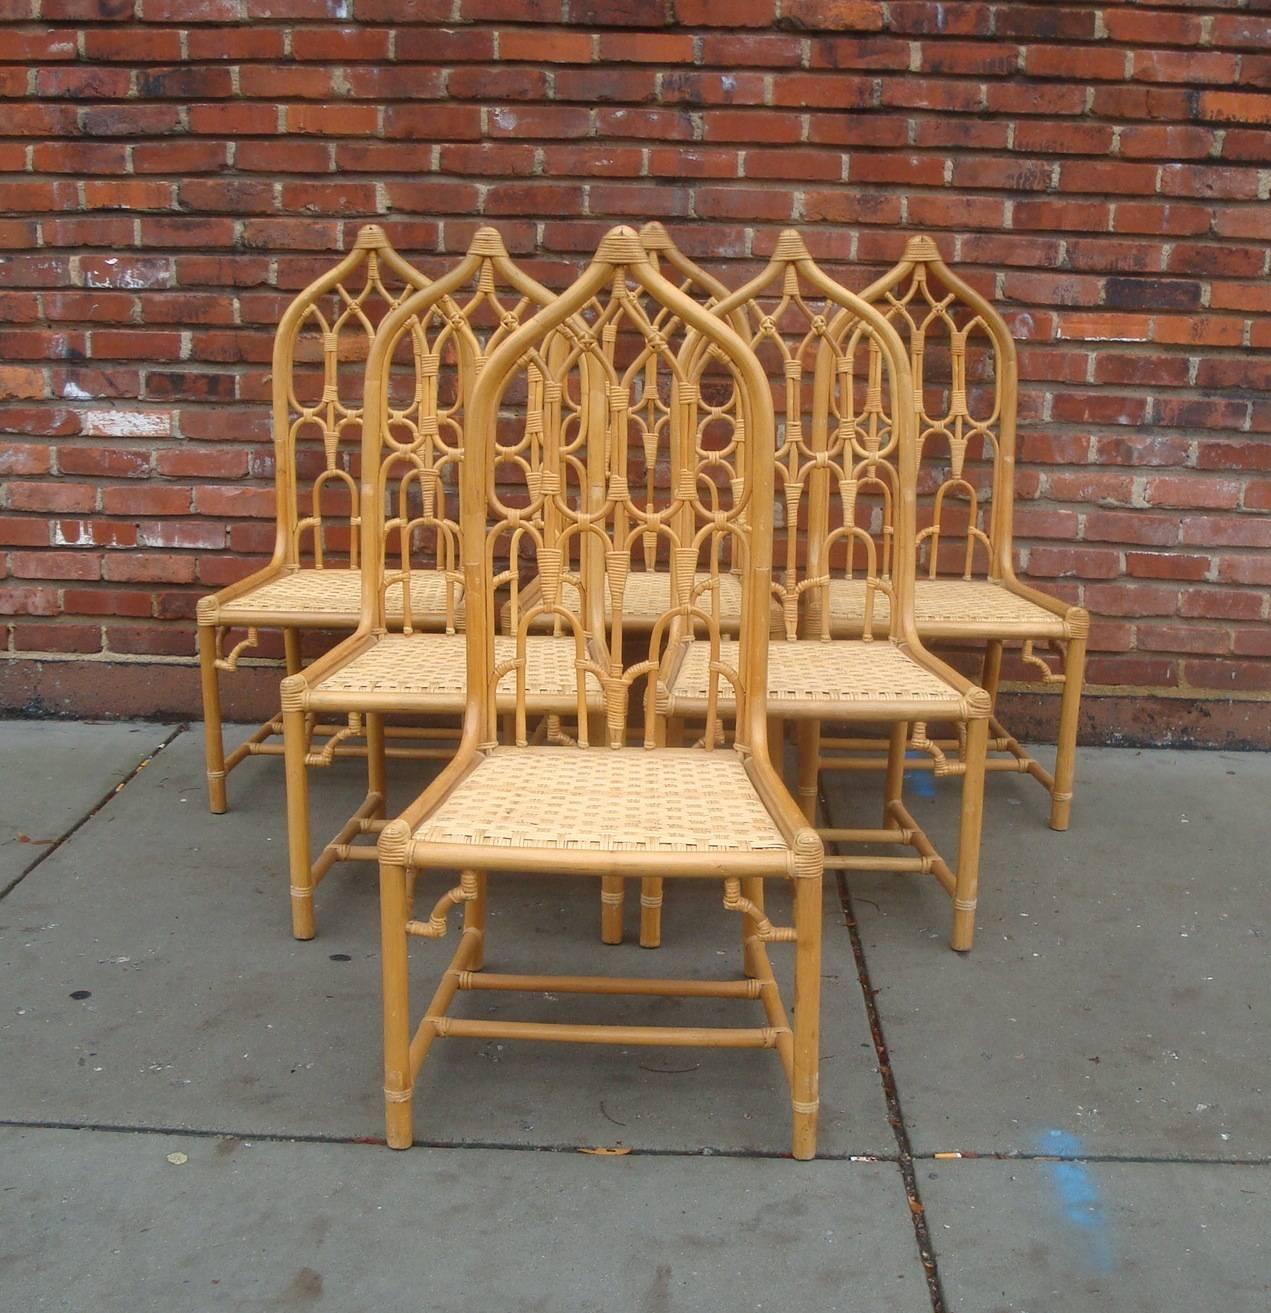 Offered is a fabulous set of six rattan bamboo dining chairs with arched arabesque cathedral high peaked backs and double stretcher bases, by McGuire. Chairs can be used with cushions if desired. Interior of seat measures 18.5" (front) and